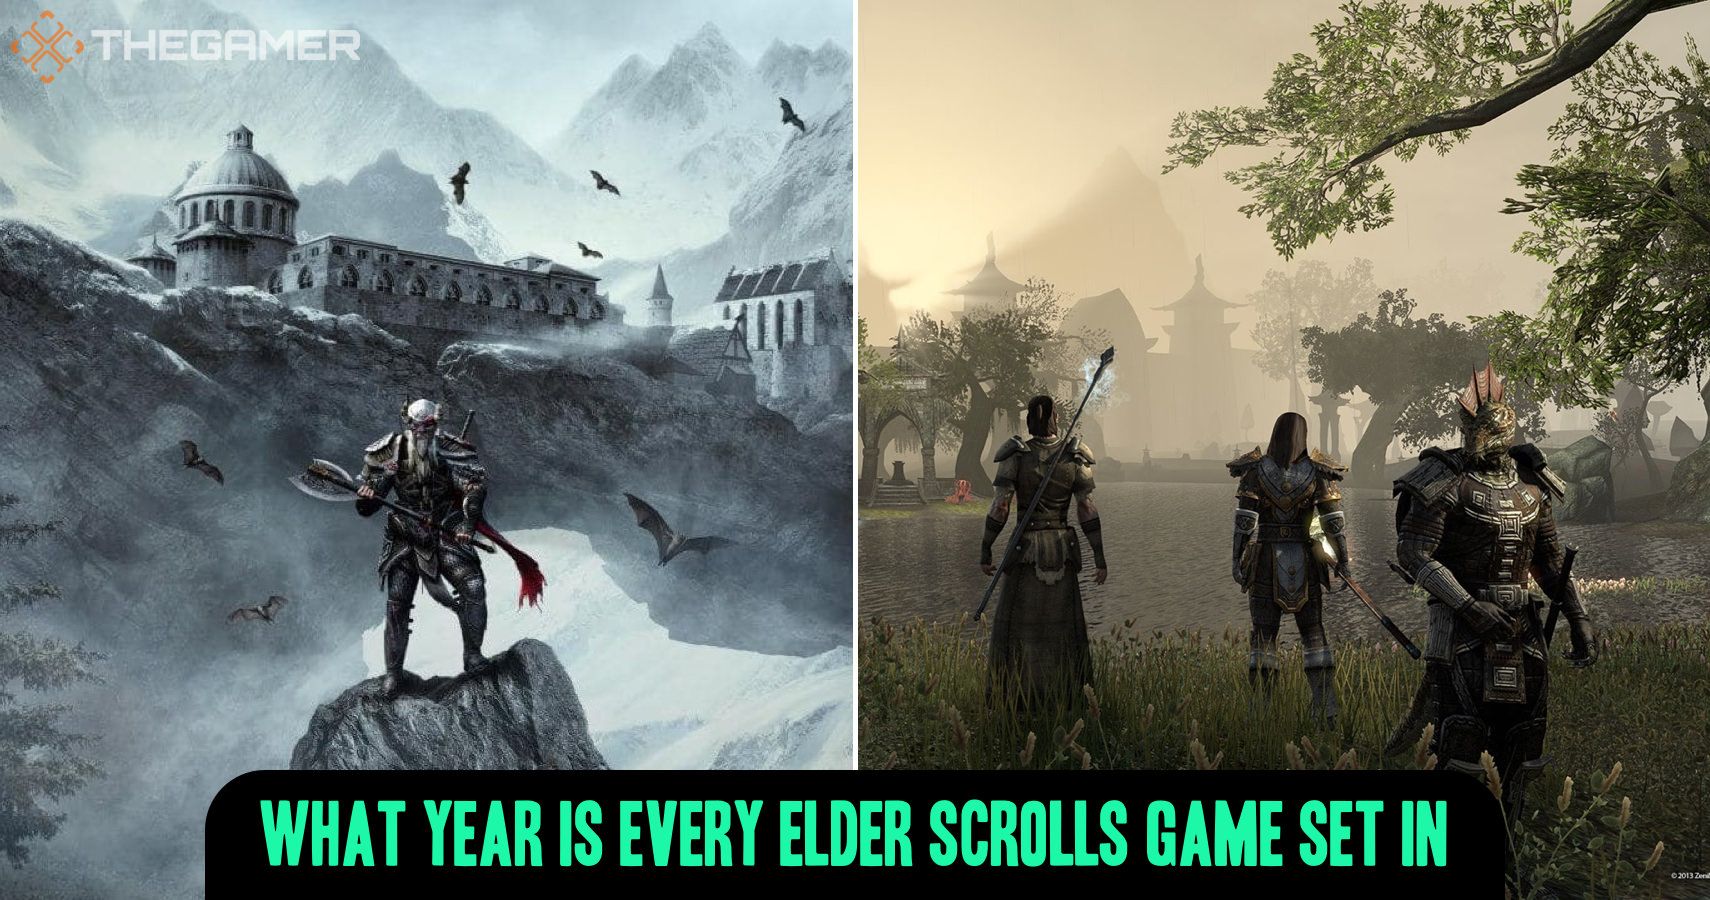 What The Elder Scrolls 6 Can Learn from TES Online